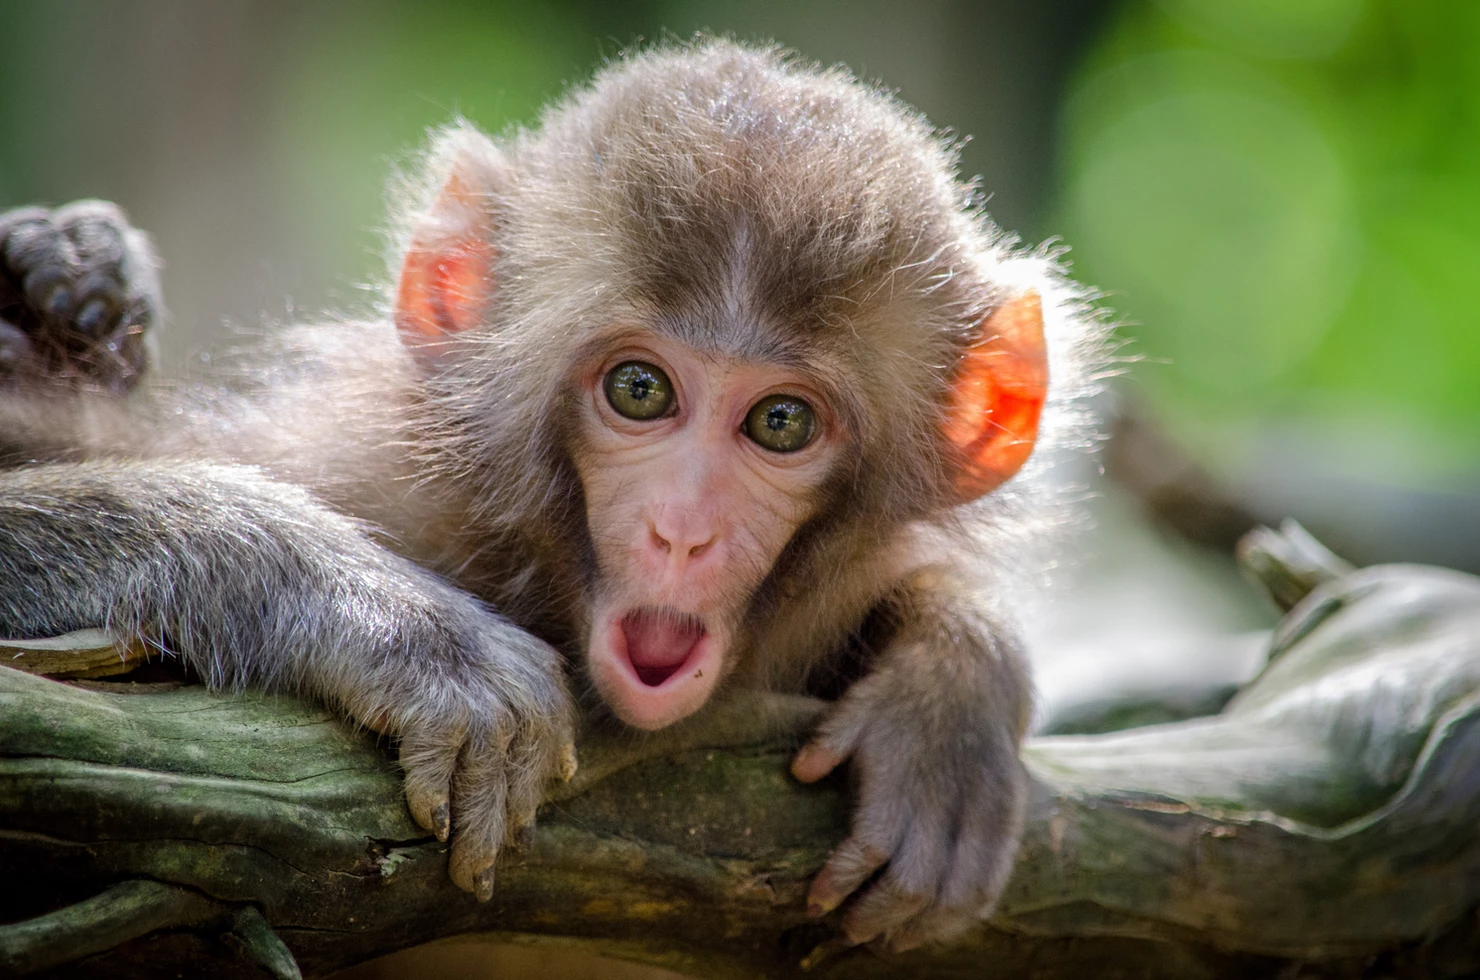 Photo of a baby monkey with a surprised expression